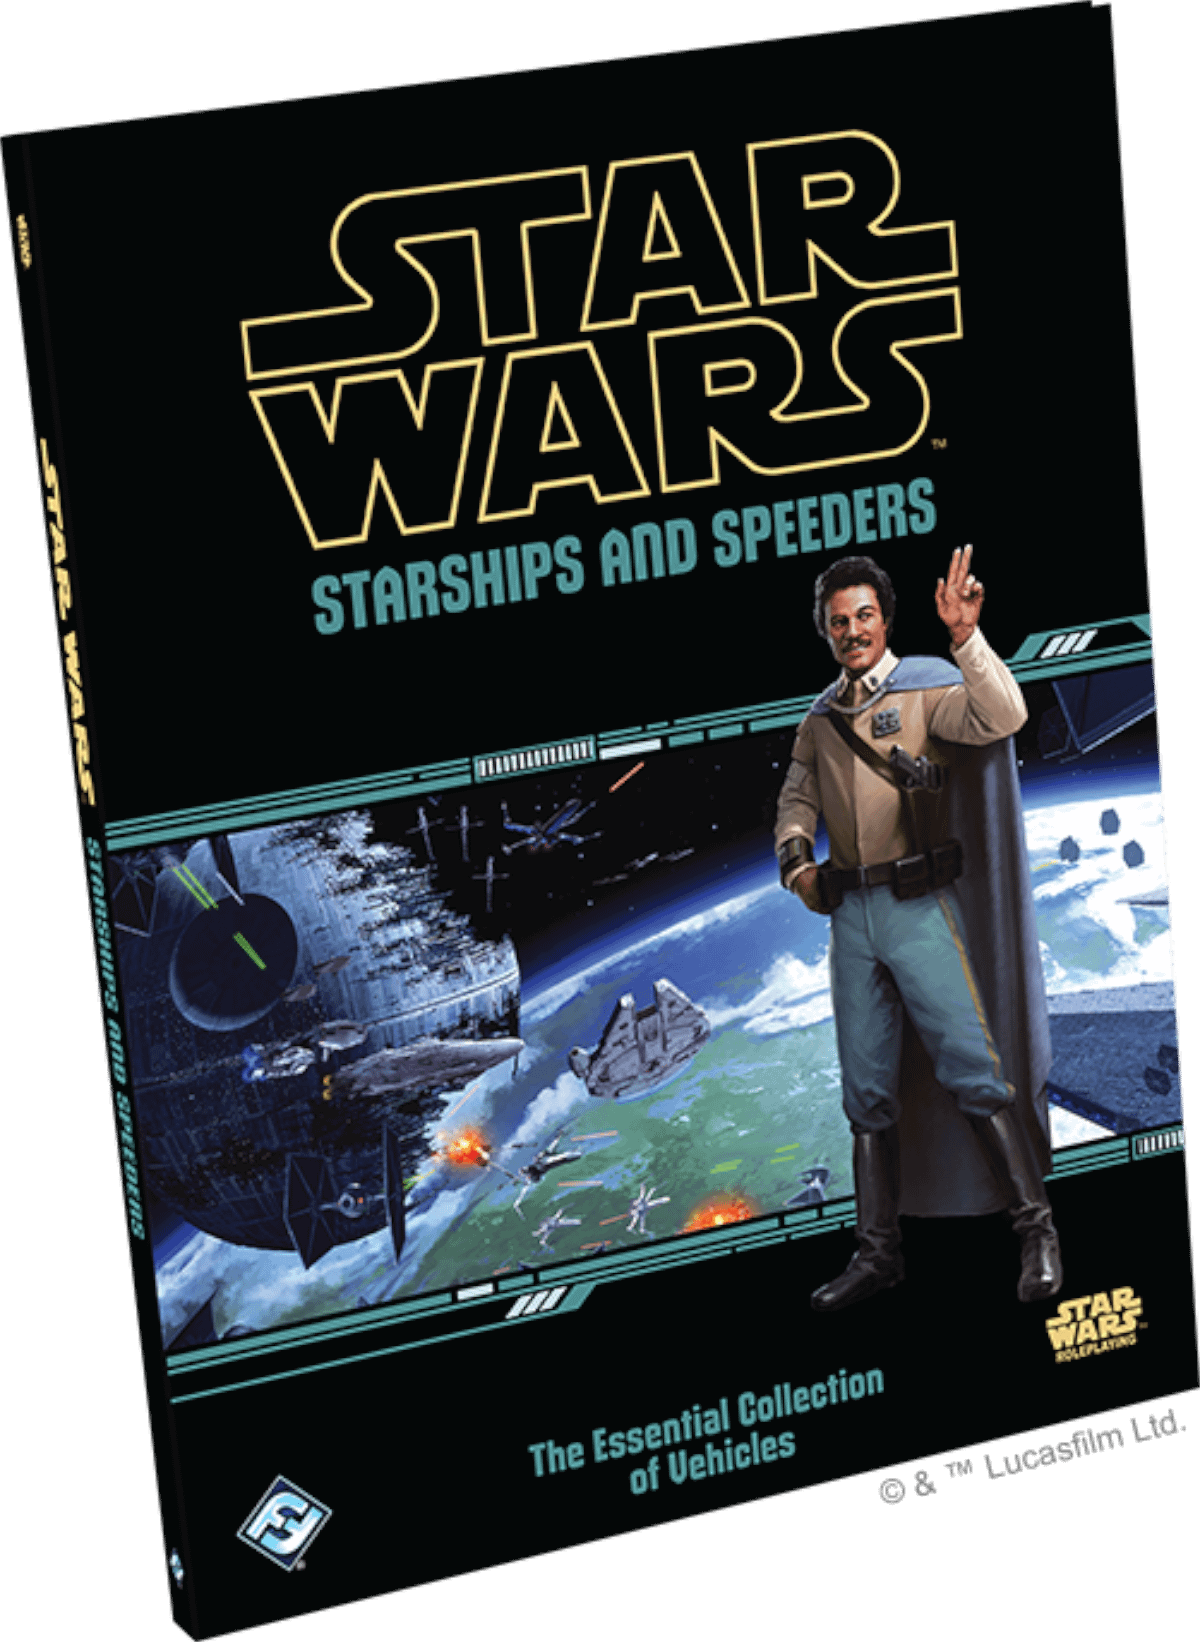 "Starships and Speeders" Coming Soon to Star Wars RPG from Fantasy Flight